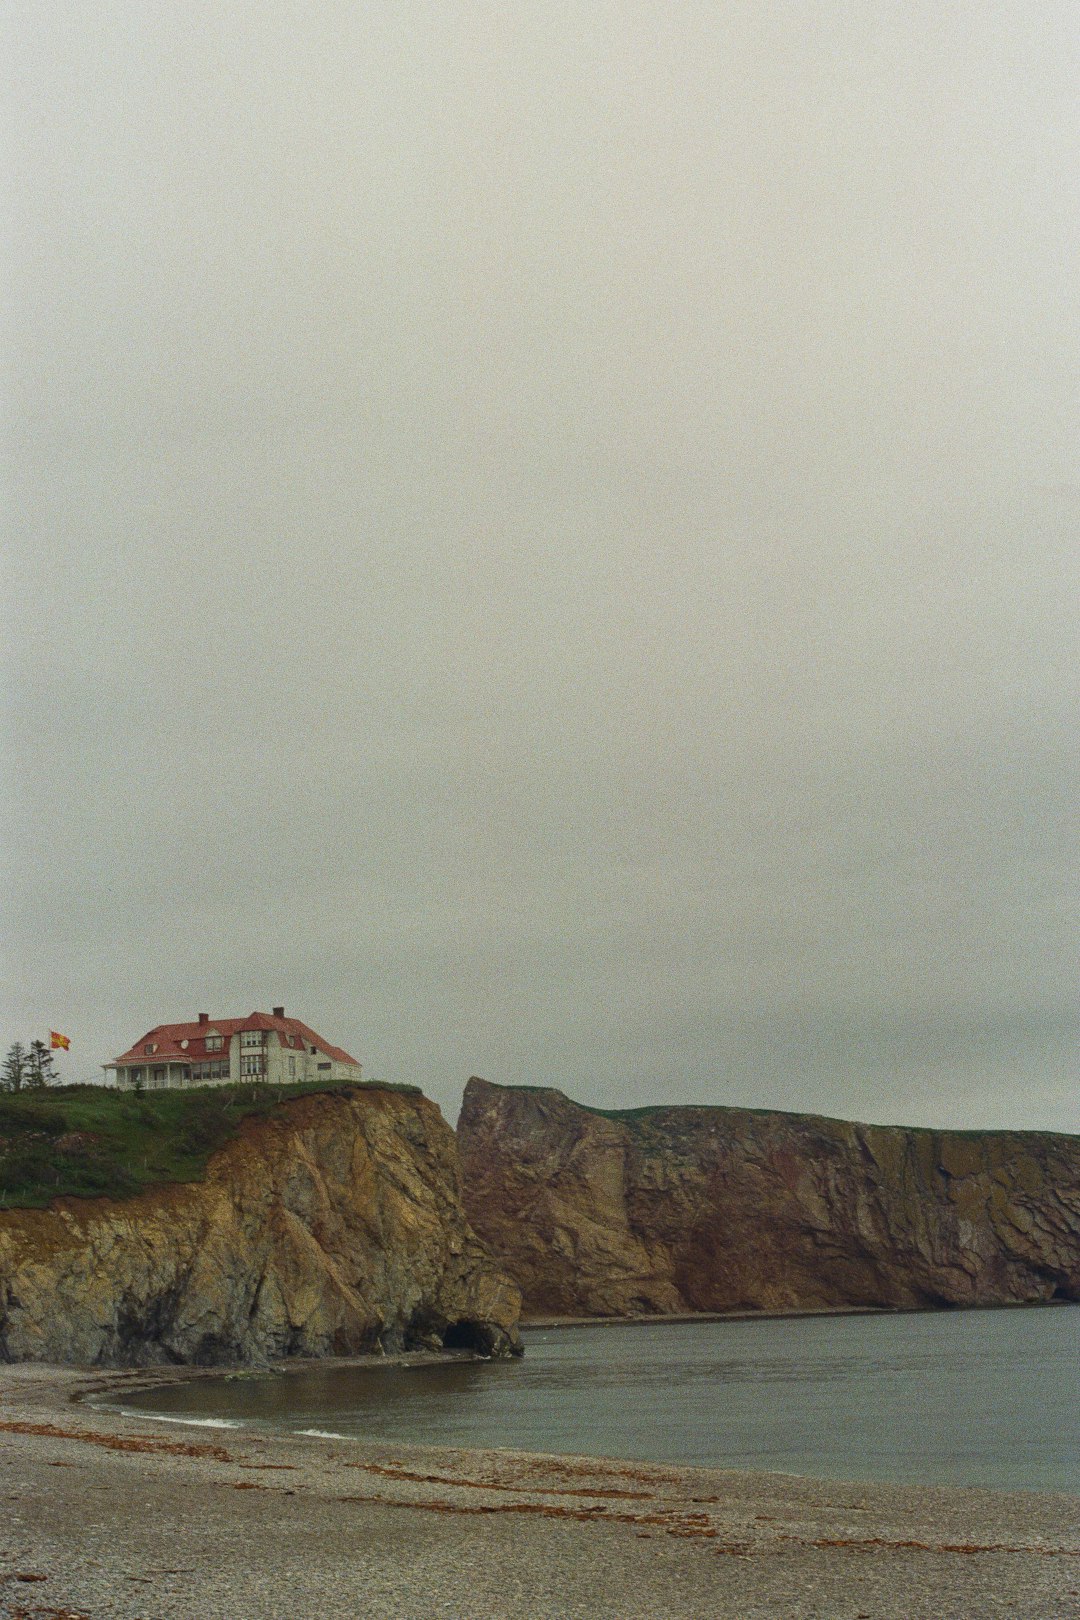 Travel Tips and Stories of Percé in Canada